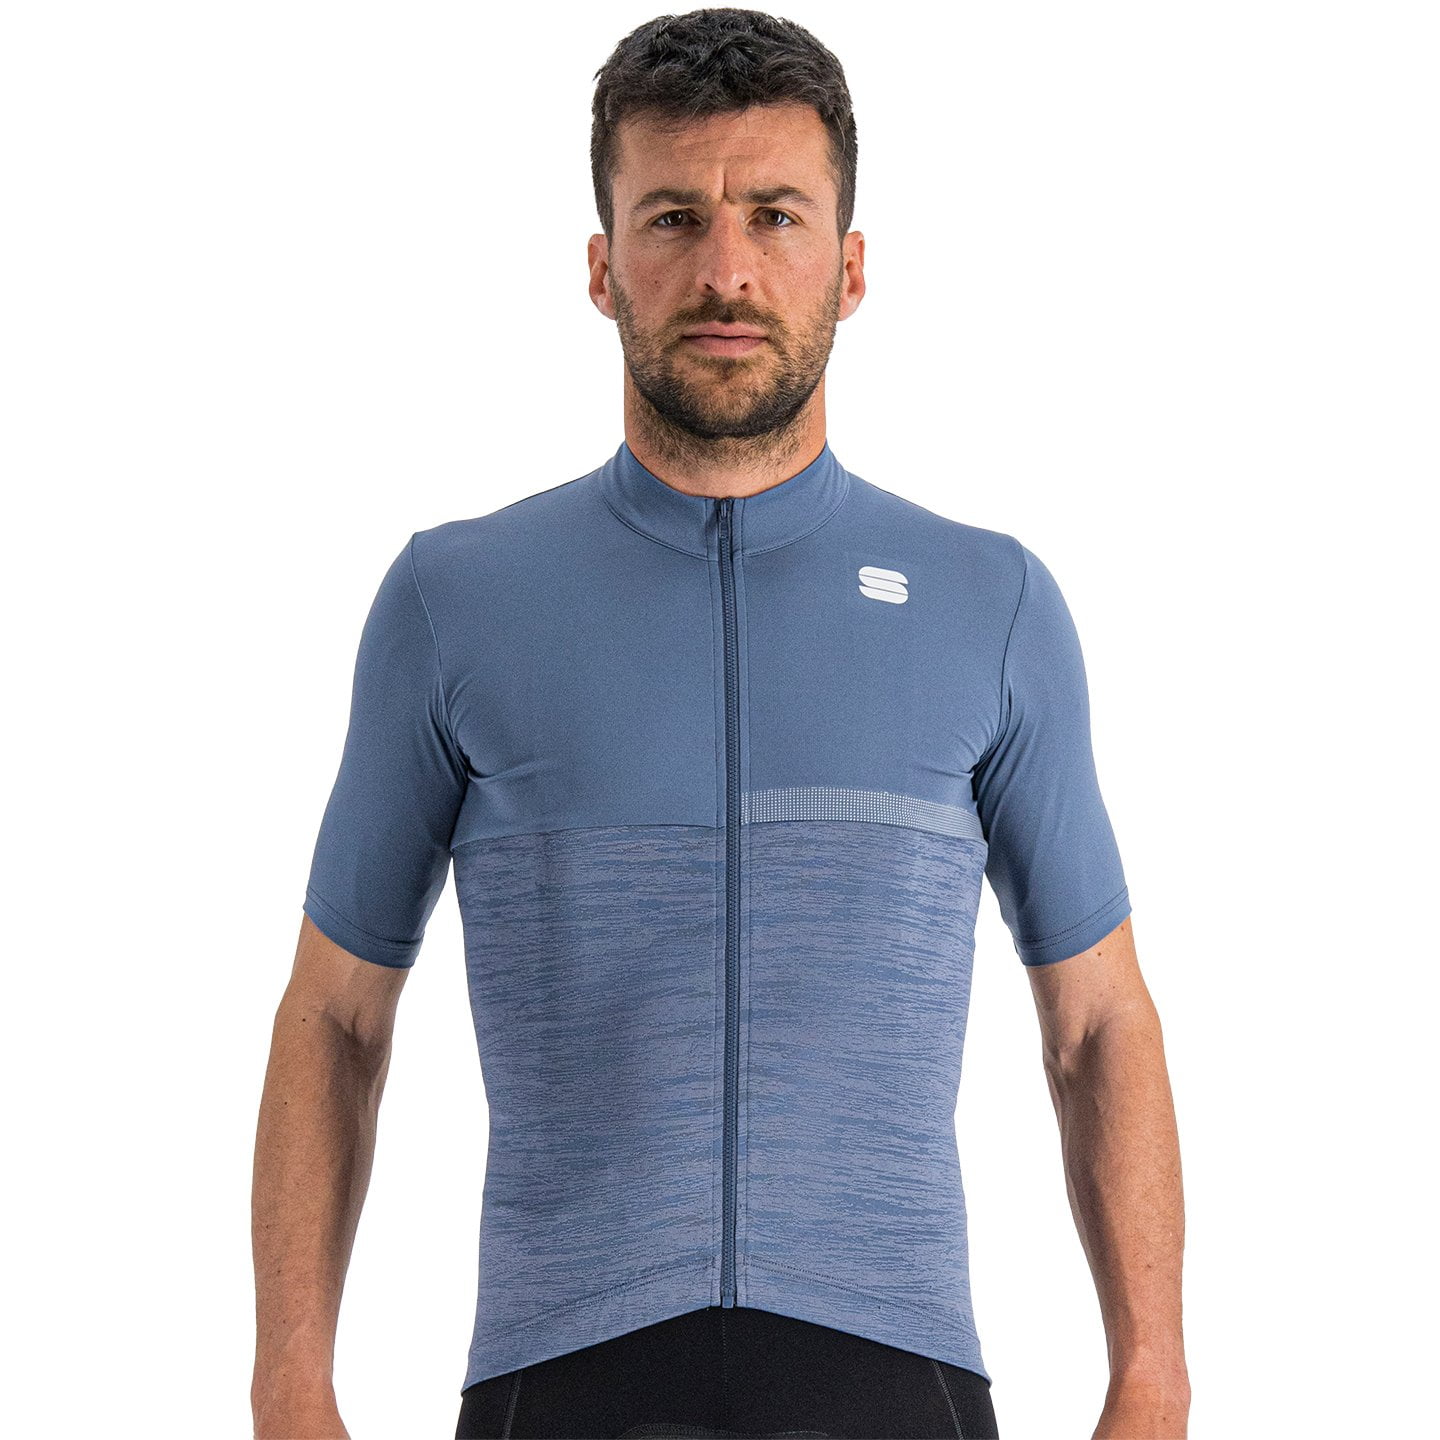 SPORTFUL Giara Short Sleeve Jersey, for men, size L, Cycling jersey, Cycling clothing